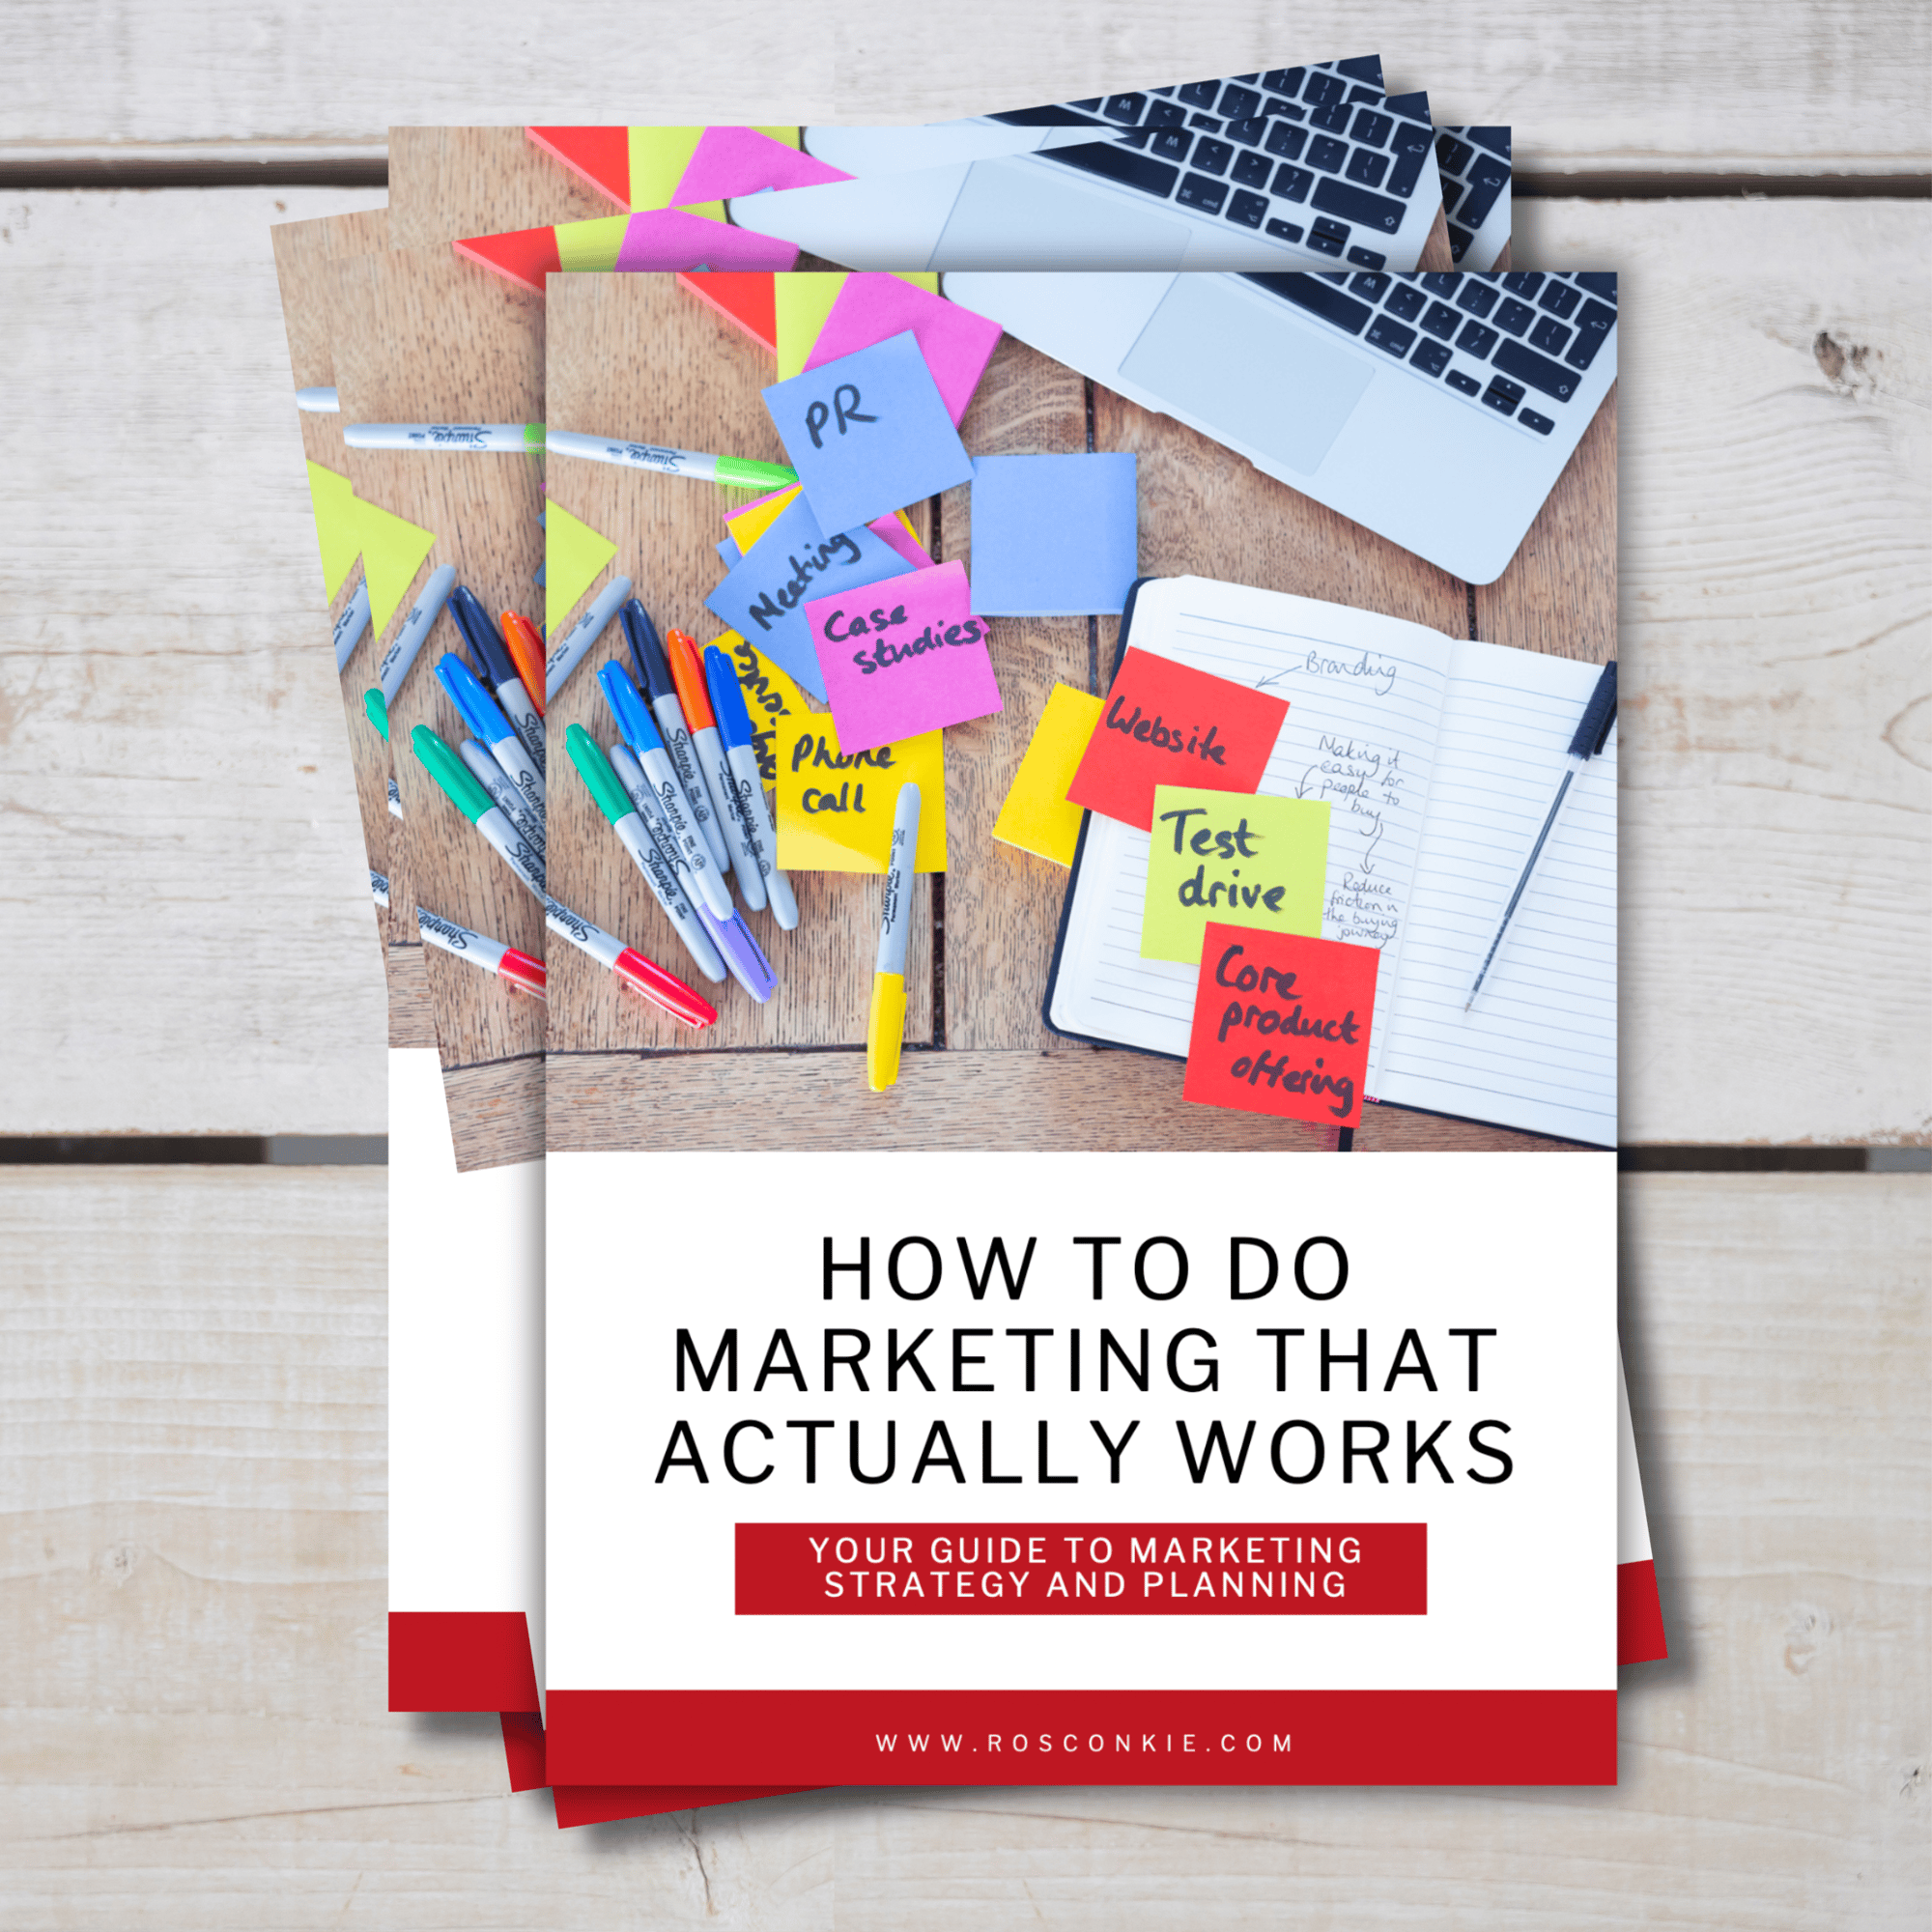 PDF Guide: How to do marketing that actually works